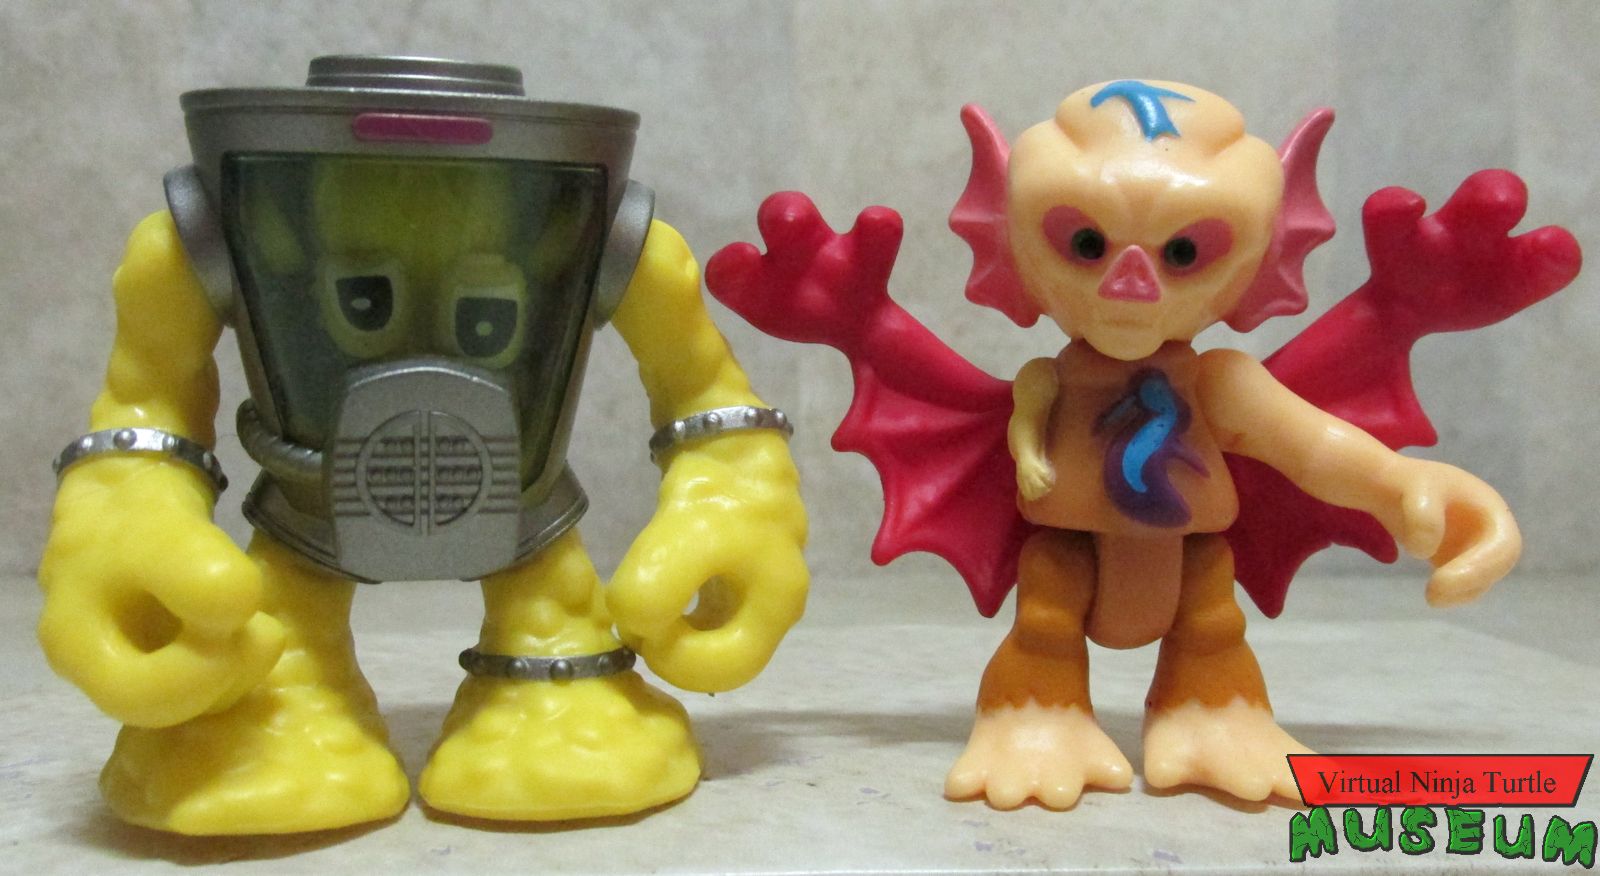 Kirby Bat & Mutagen Man front and back